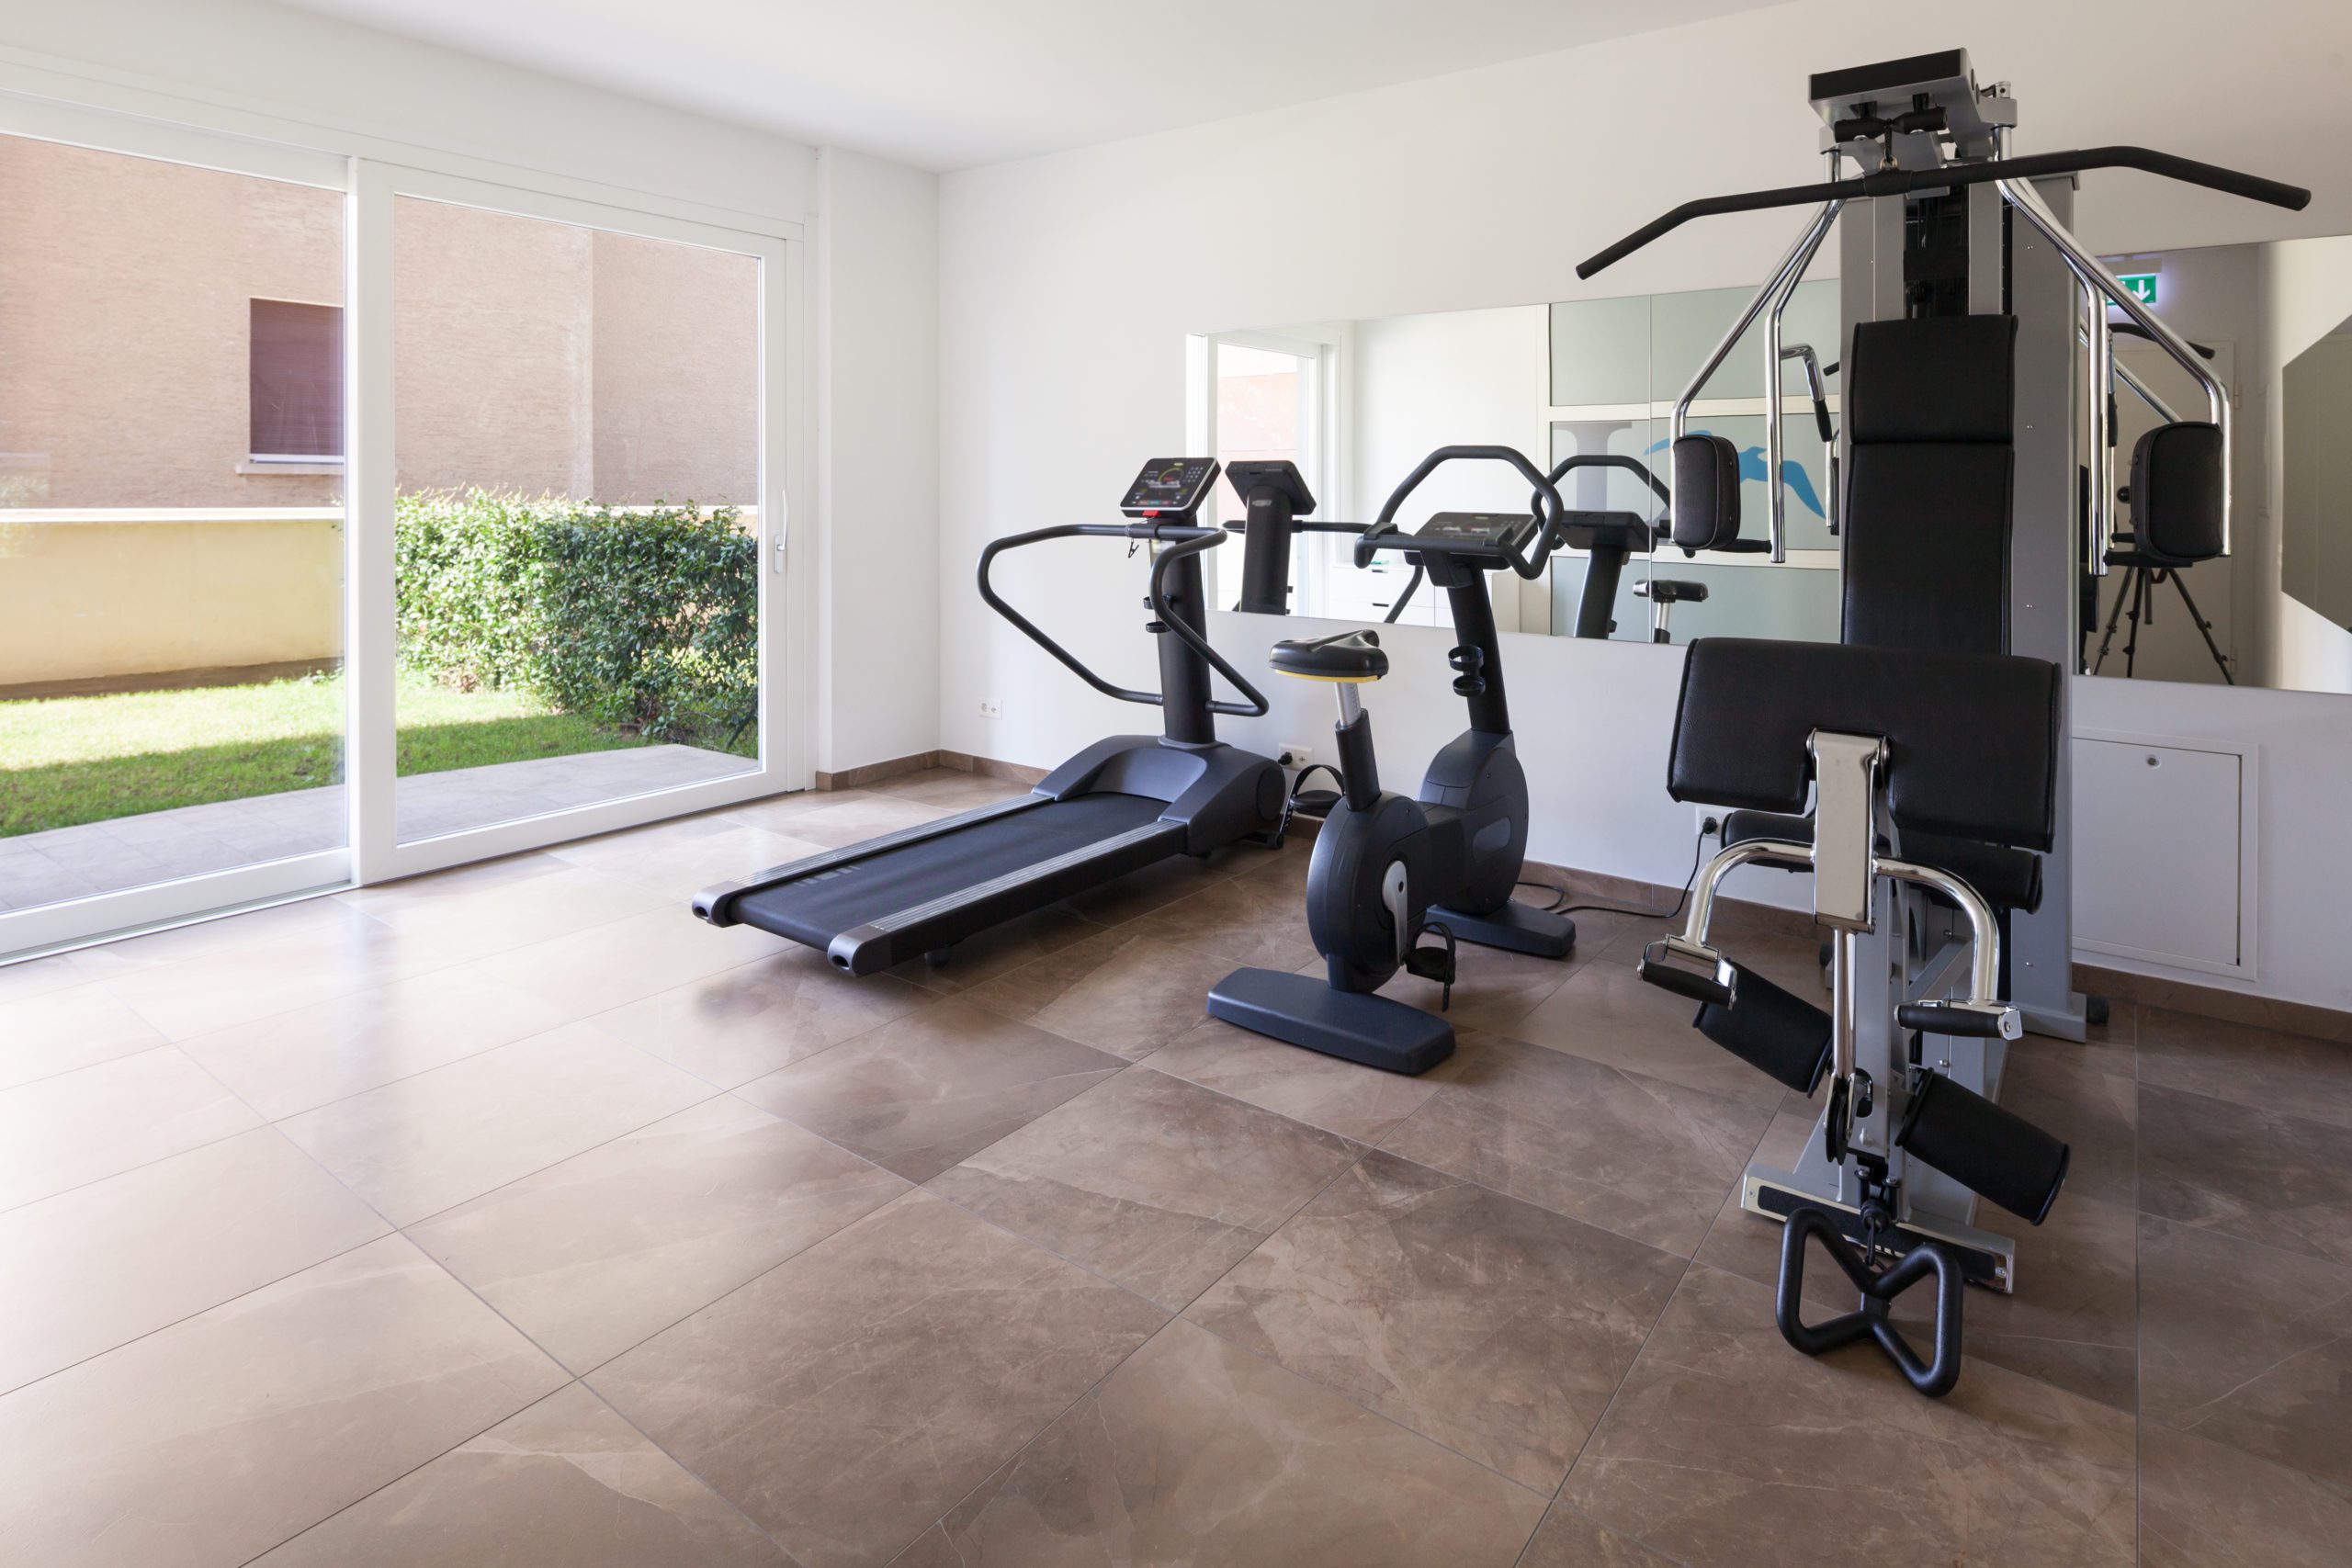 Home Gyms - The Future Of The Fitness Industry, Long Island, NY